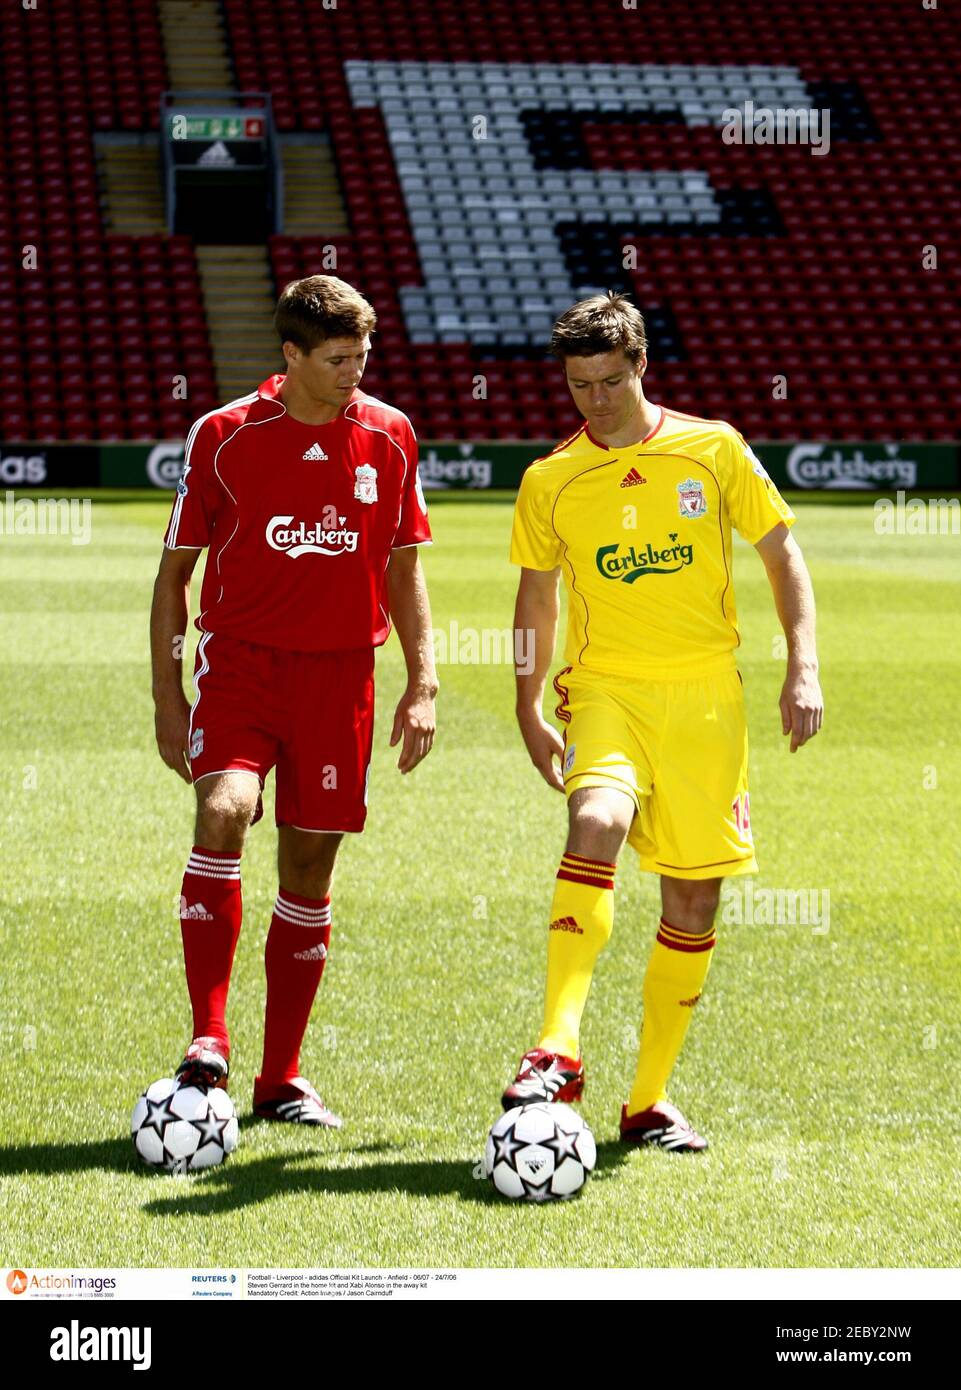 Football - Liverpool - adidas Official Kit Launch - Anfield - 06/07 -  24/7/06 Steven Gerrard in the home kit and Xabi Alonso in the away kit  Mandatory Credit: Action Images / Jason Cairnduff Stock Photo - Alamy